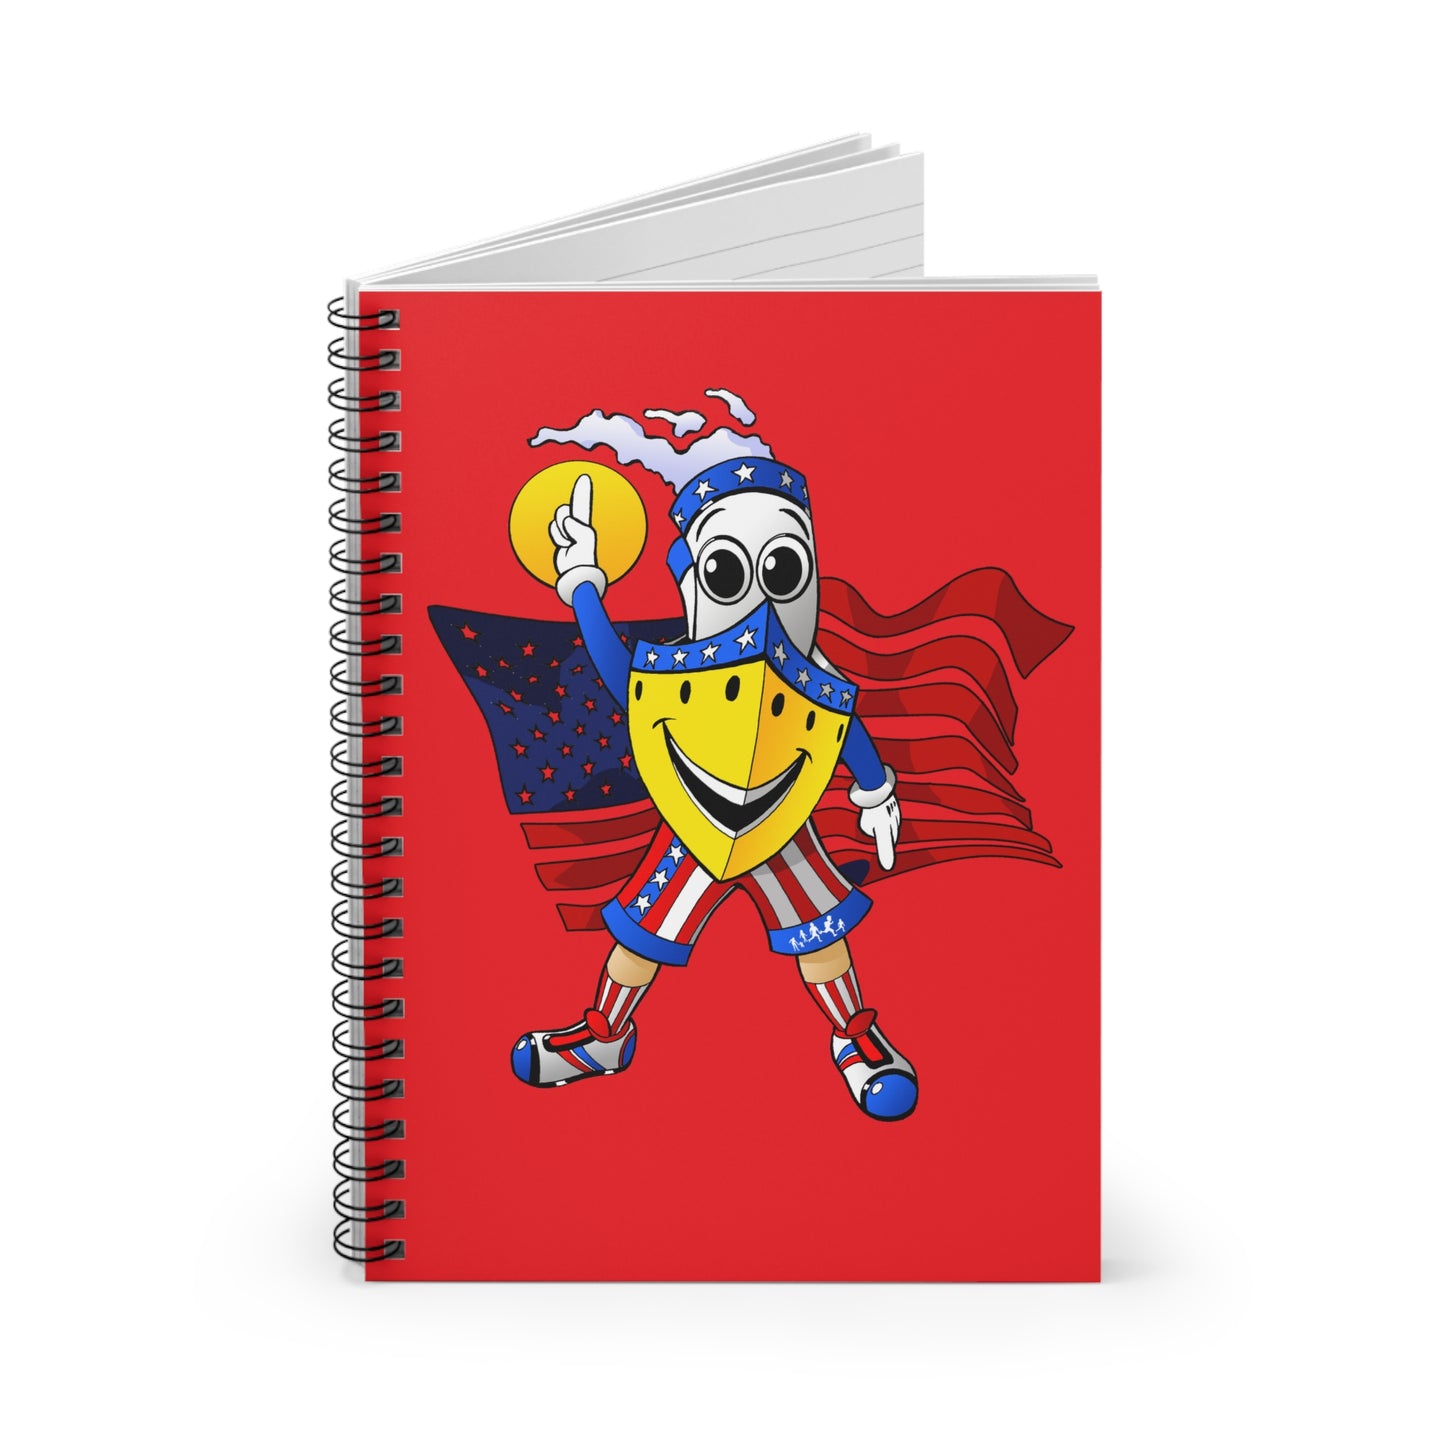 BUDDY CRUISE Patriot Spiral Notebook - Ruled Line - Great for Journaling & Drawing!